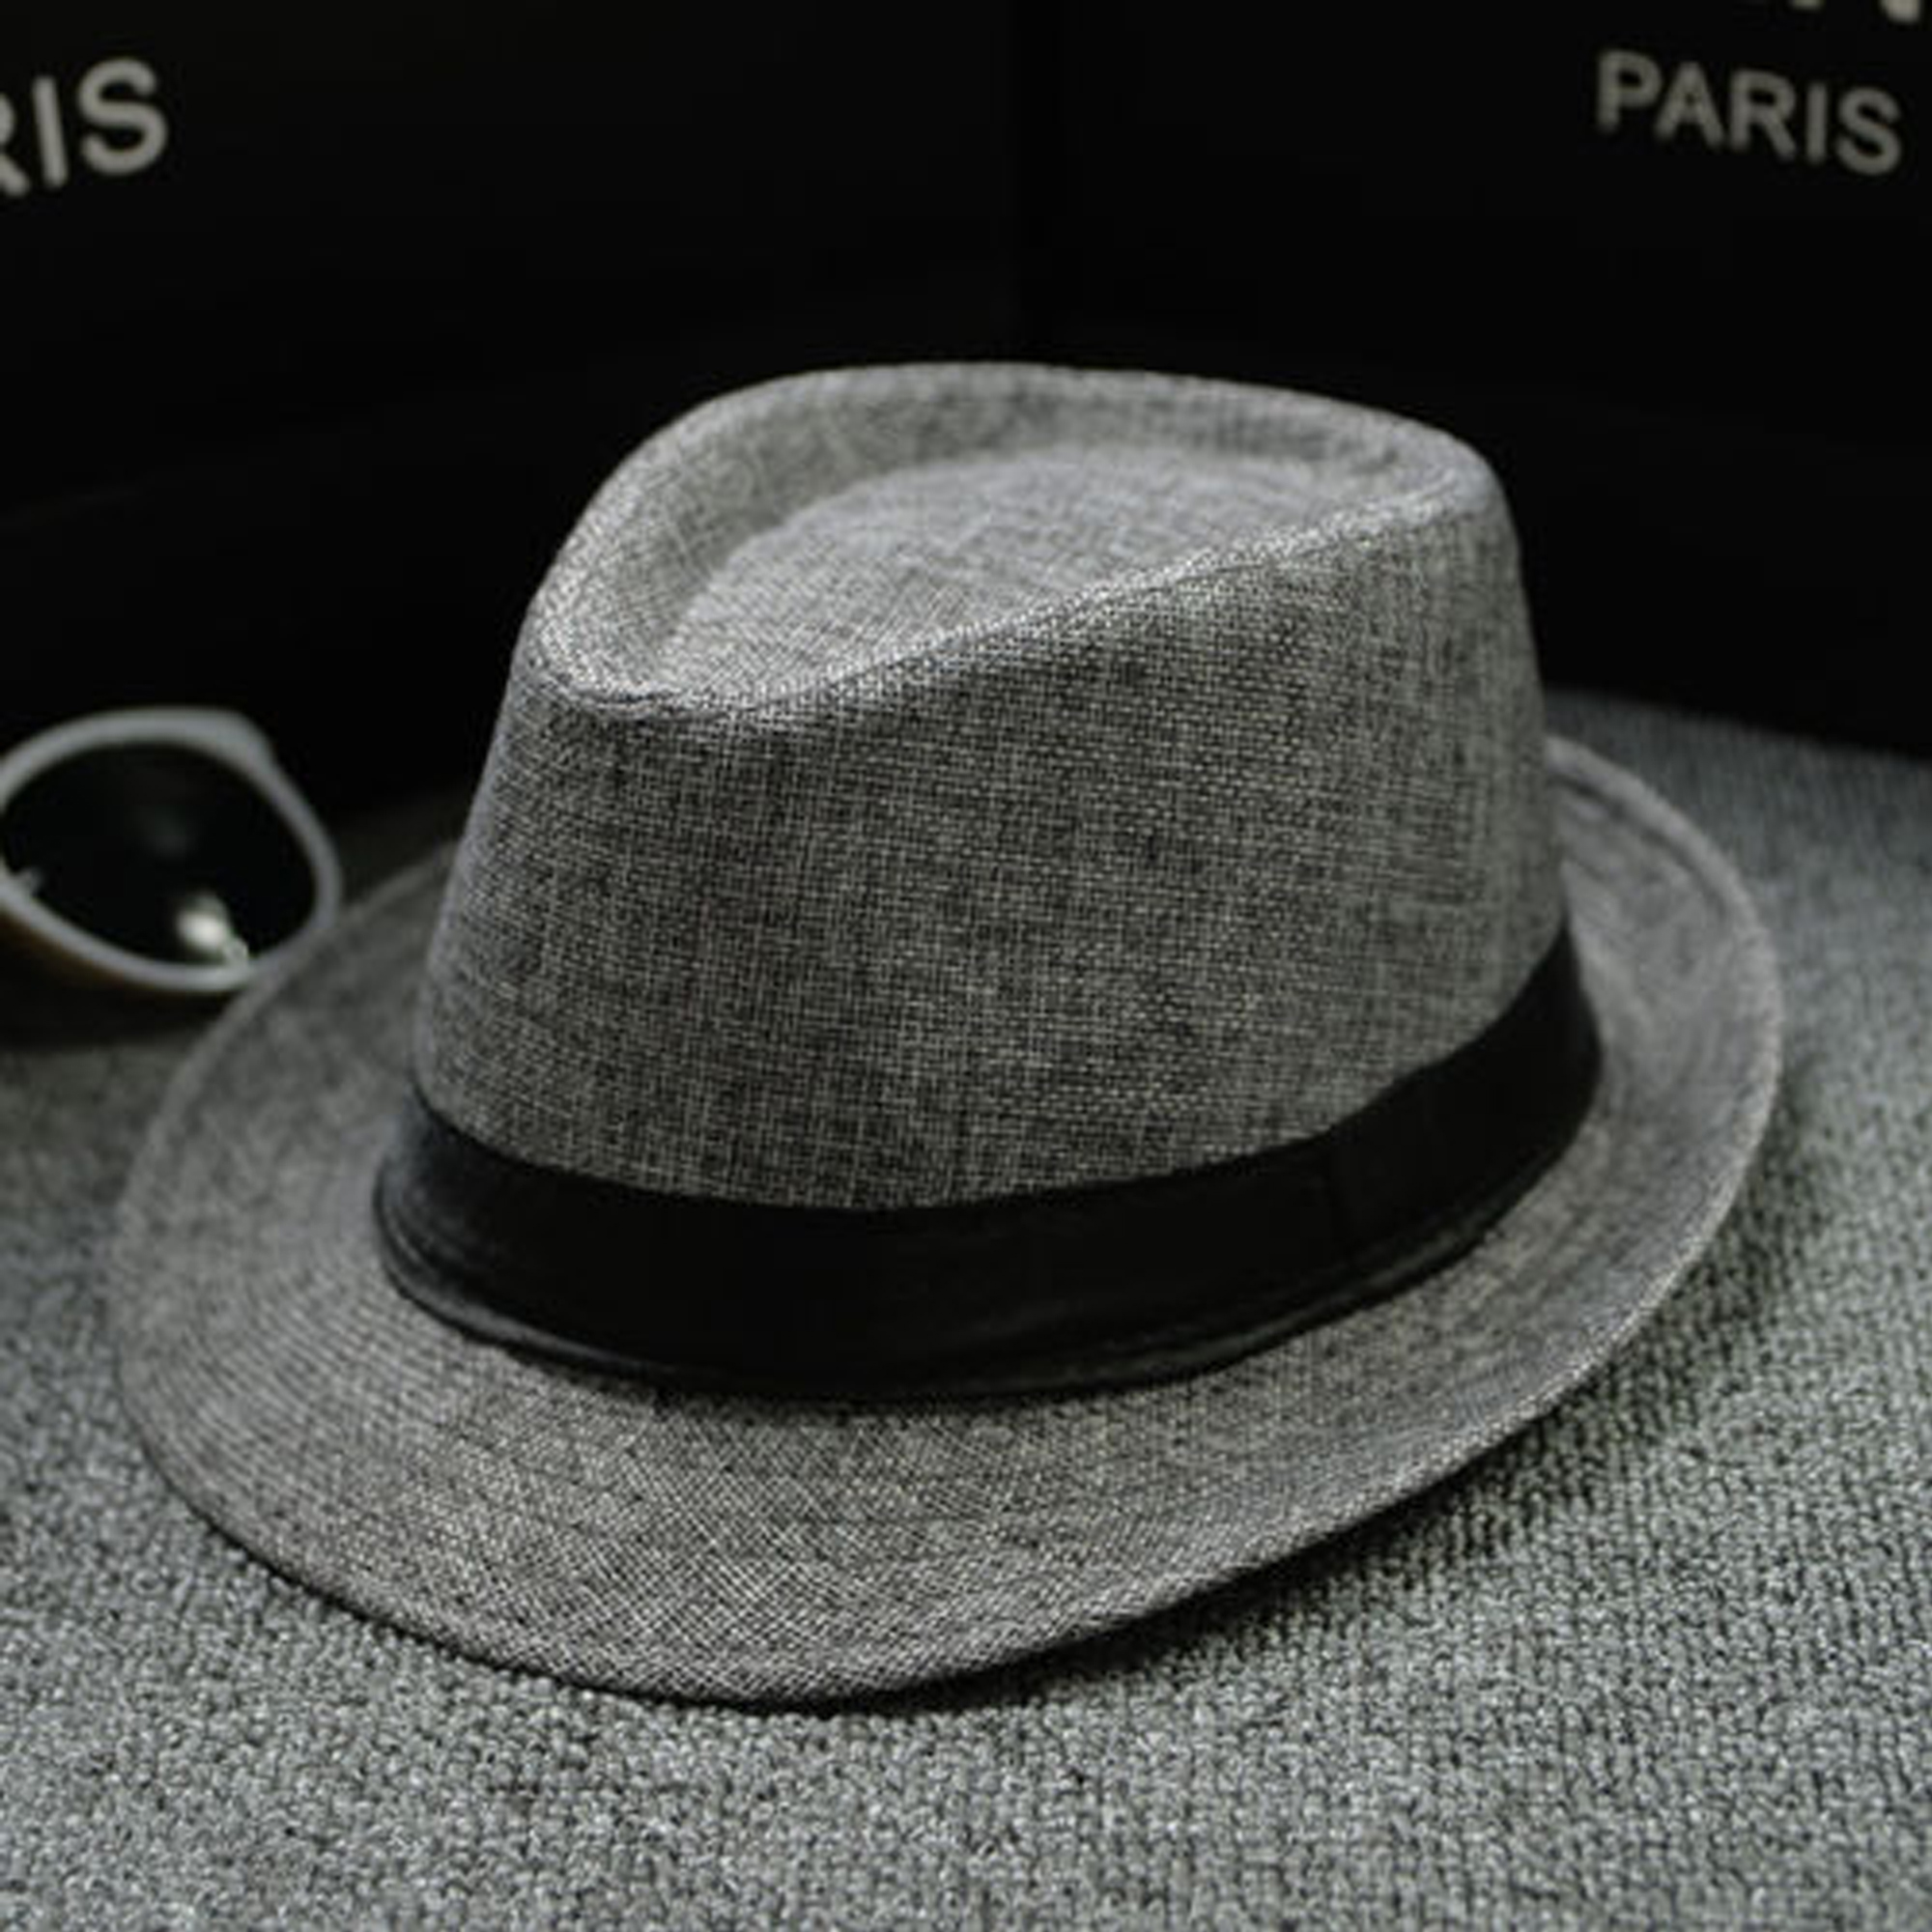 Wholesale Jazz Panama  Ladies Fedora Hats For Women And Men Wide Brim  Patchwork Hat With Trilby Chapeau Design Perfect Spring/Autumn/Winter Gift  From Fashion_clothes2, $3.28